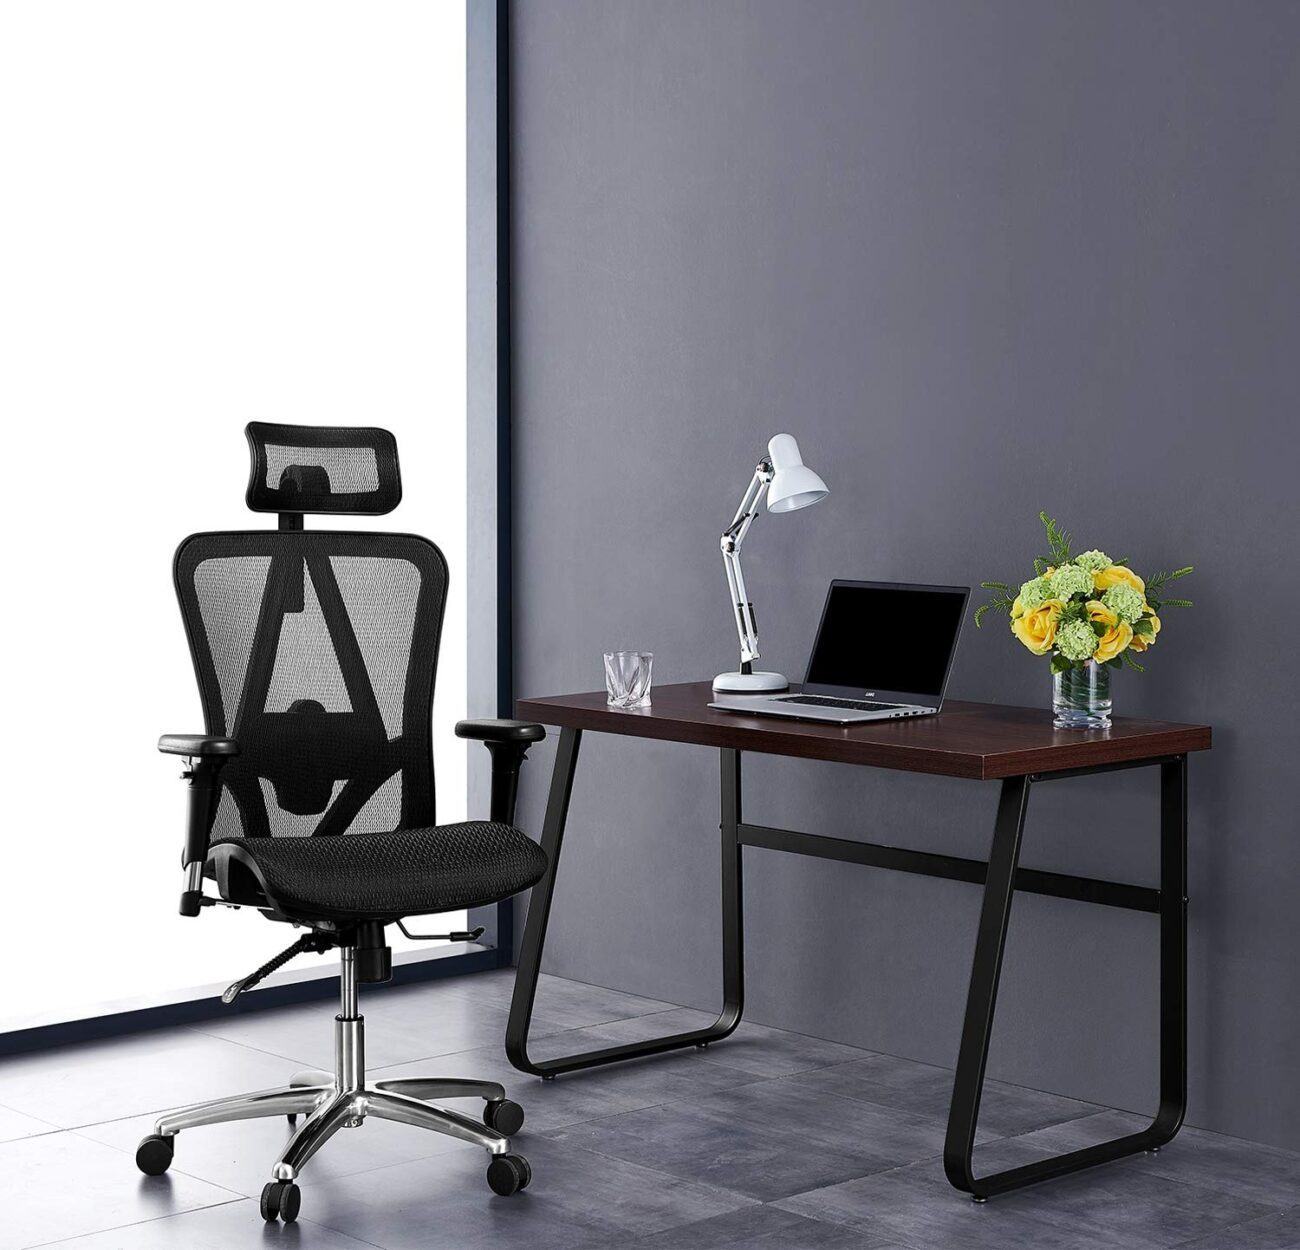 10 Best Ergonomic Office Chair for Tall People